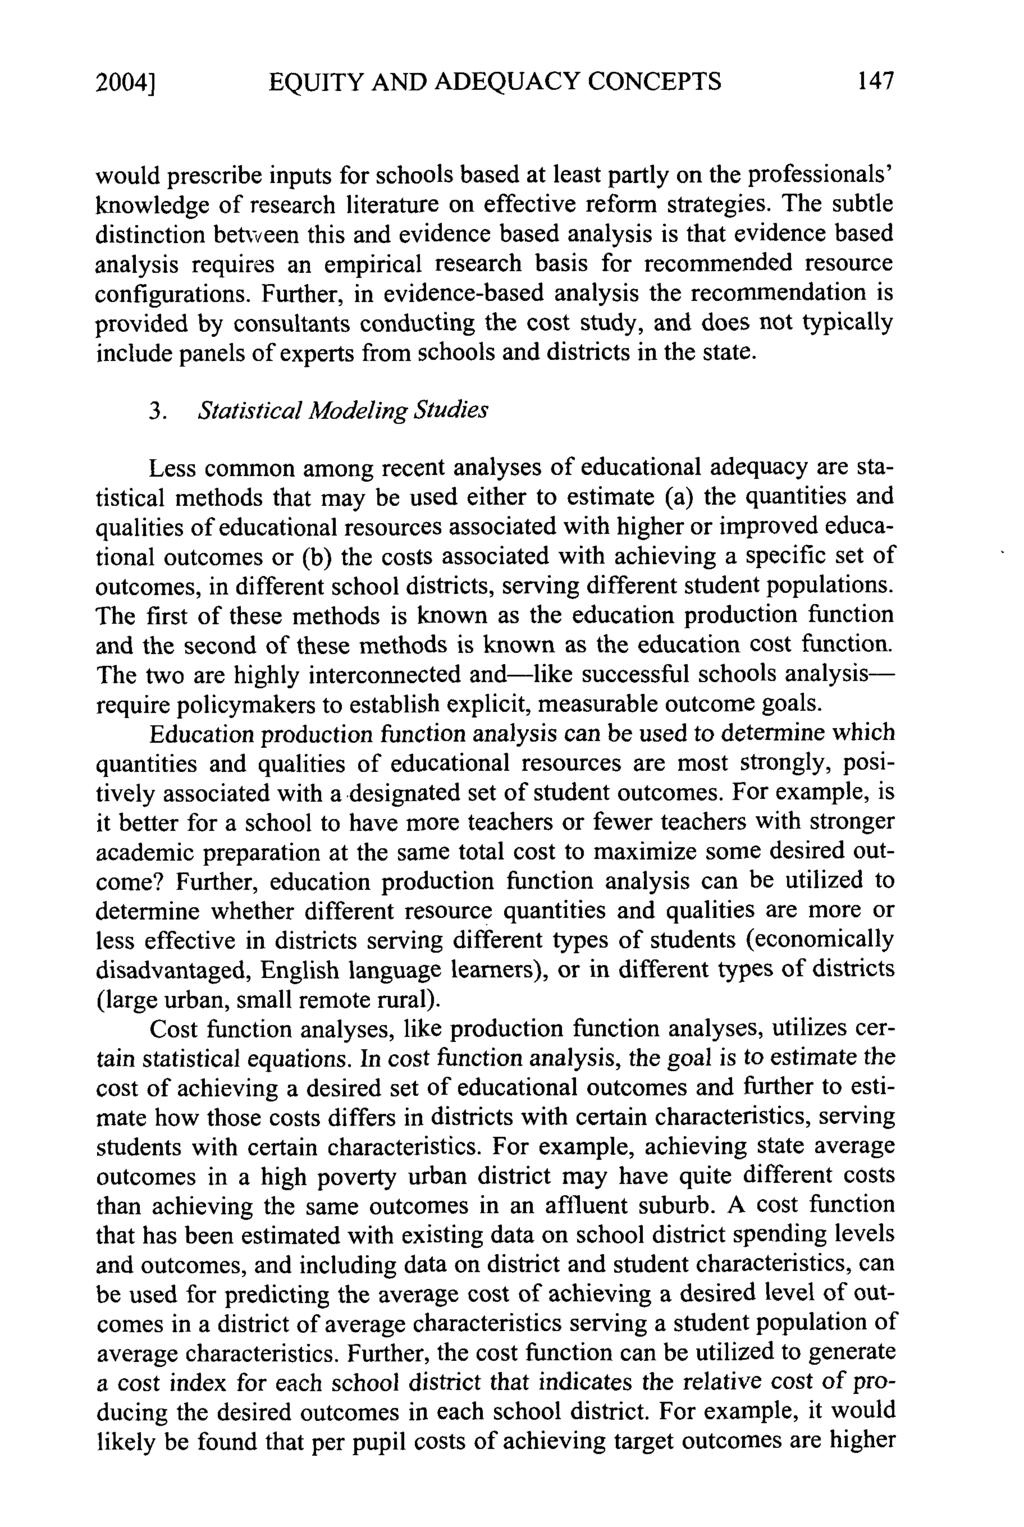 2004] EQUITY AND ADEQUACY CONCEPTS would prescribe inputs for schools based at least partly on the professionals' knowledge of research literature on effective reform strategies.